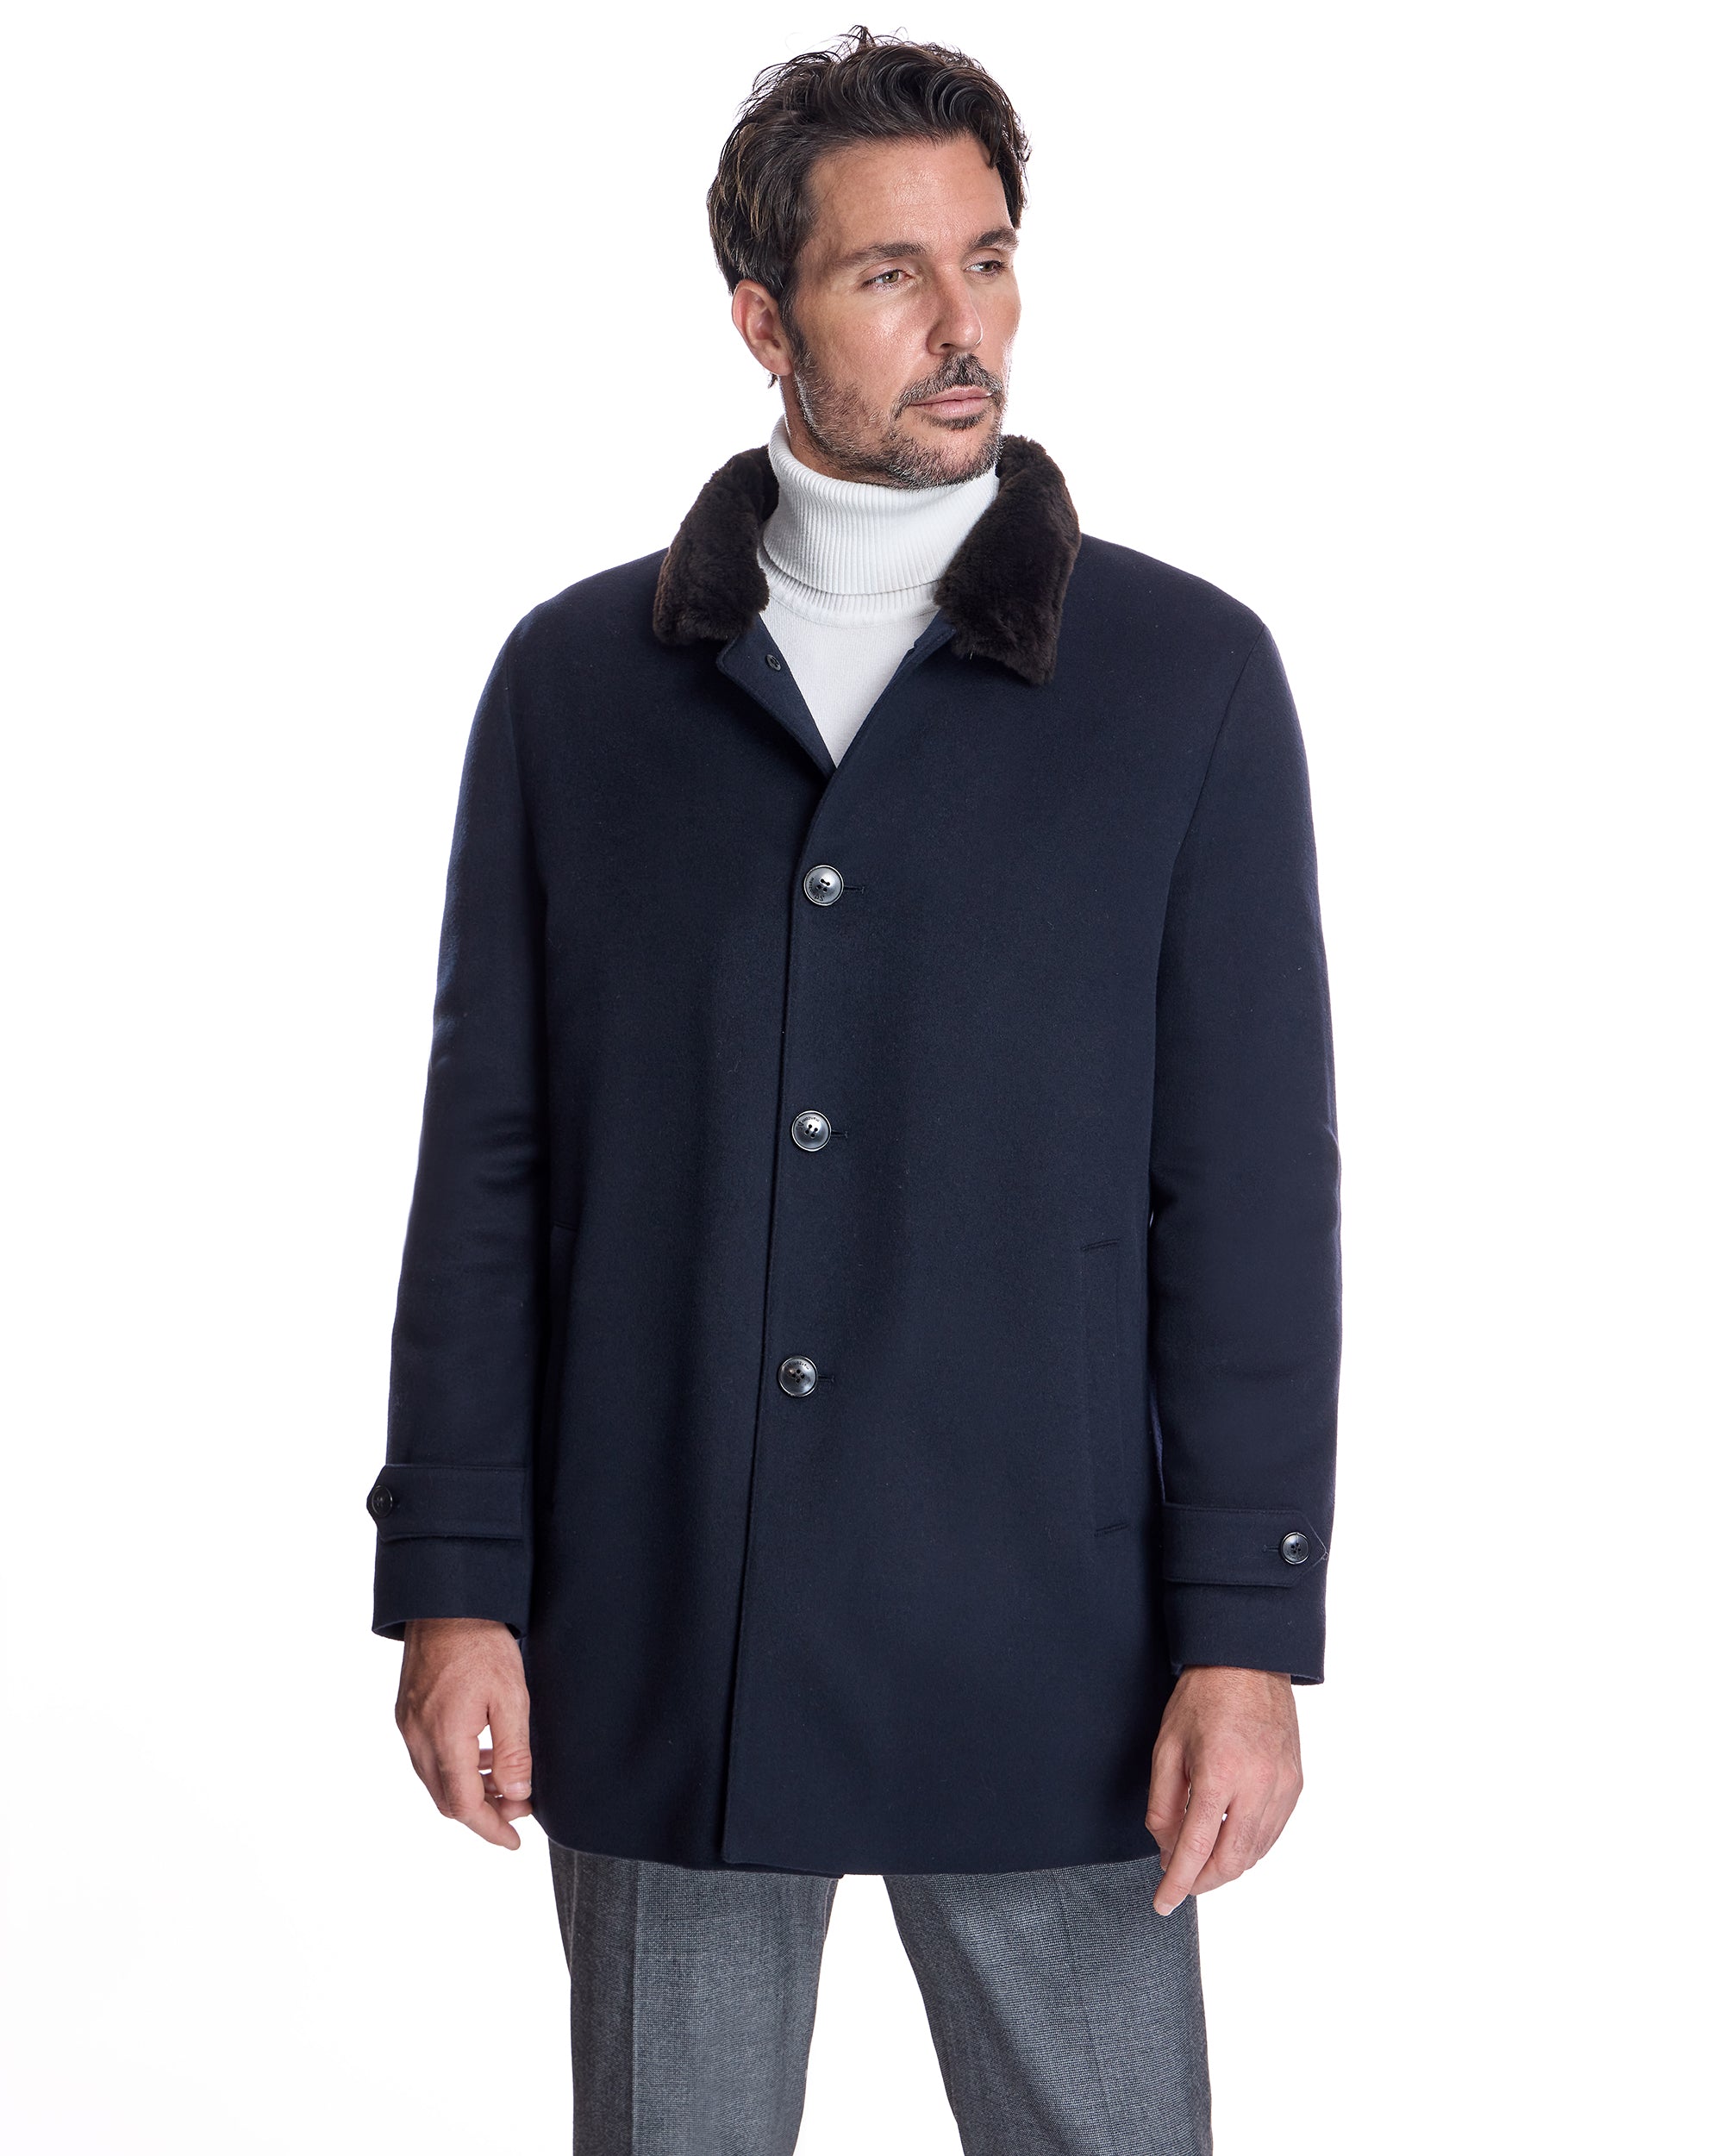 Men's Cashmere Jacket with Nutria Lining